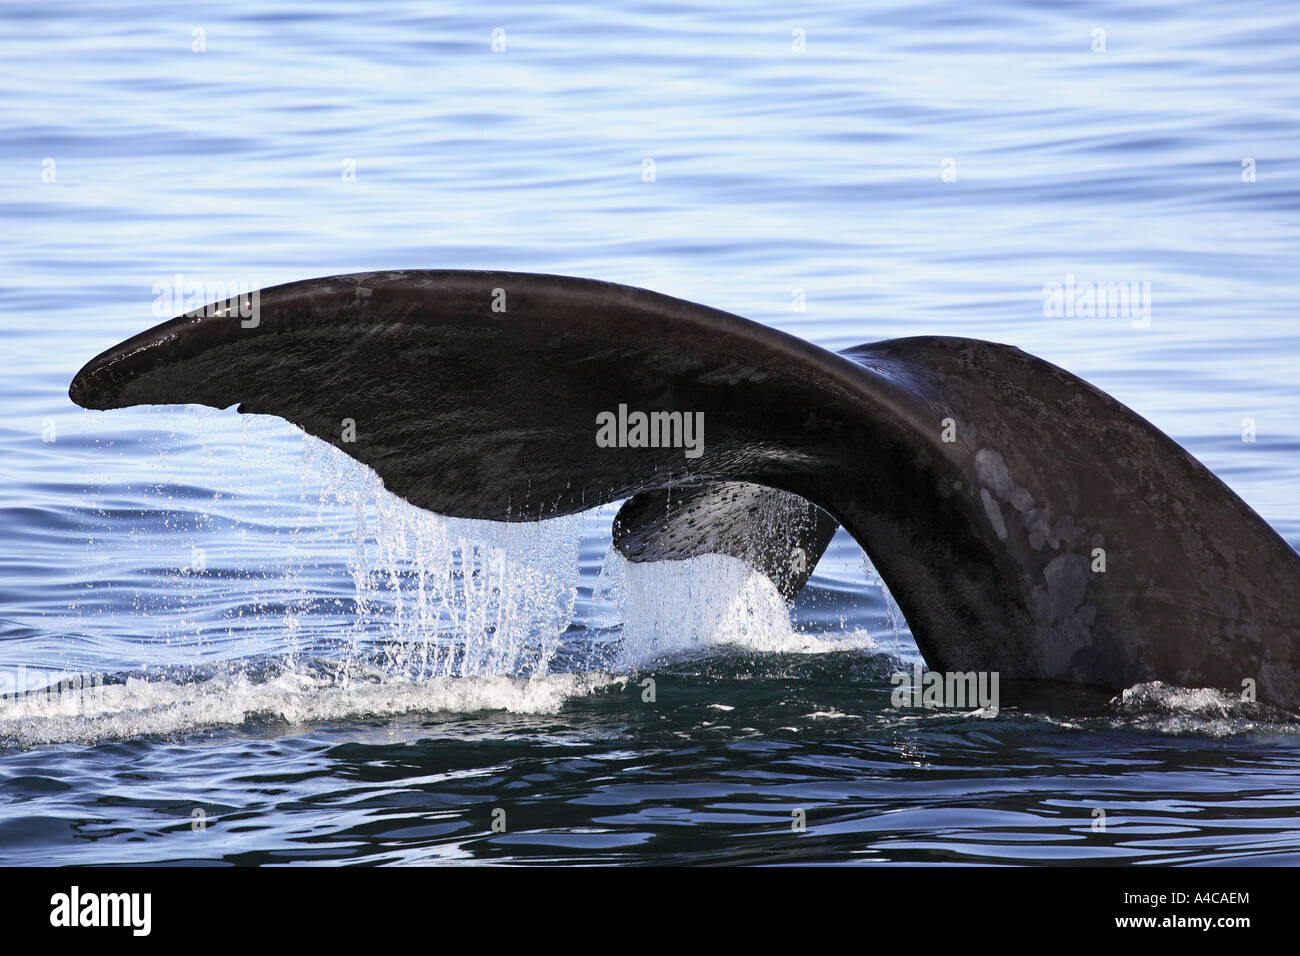 tail of a southern right whale South Africa Stock Photo